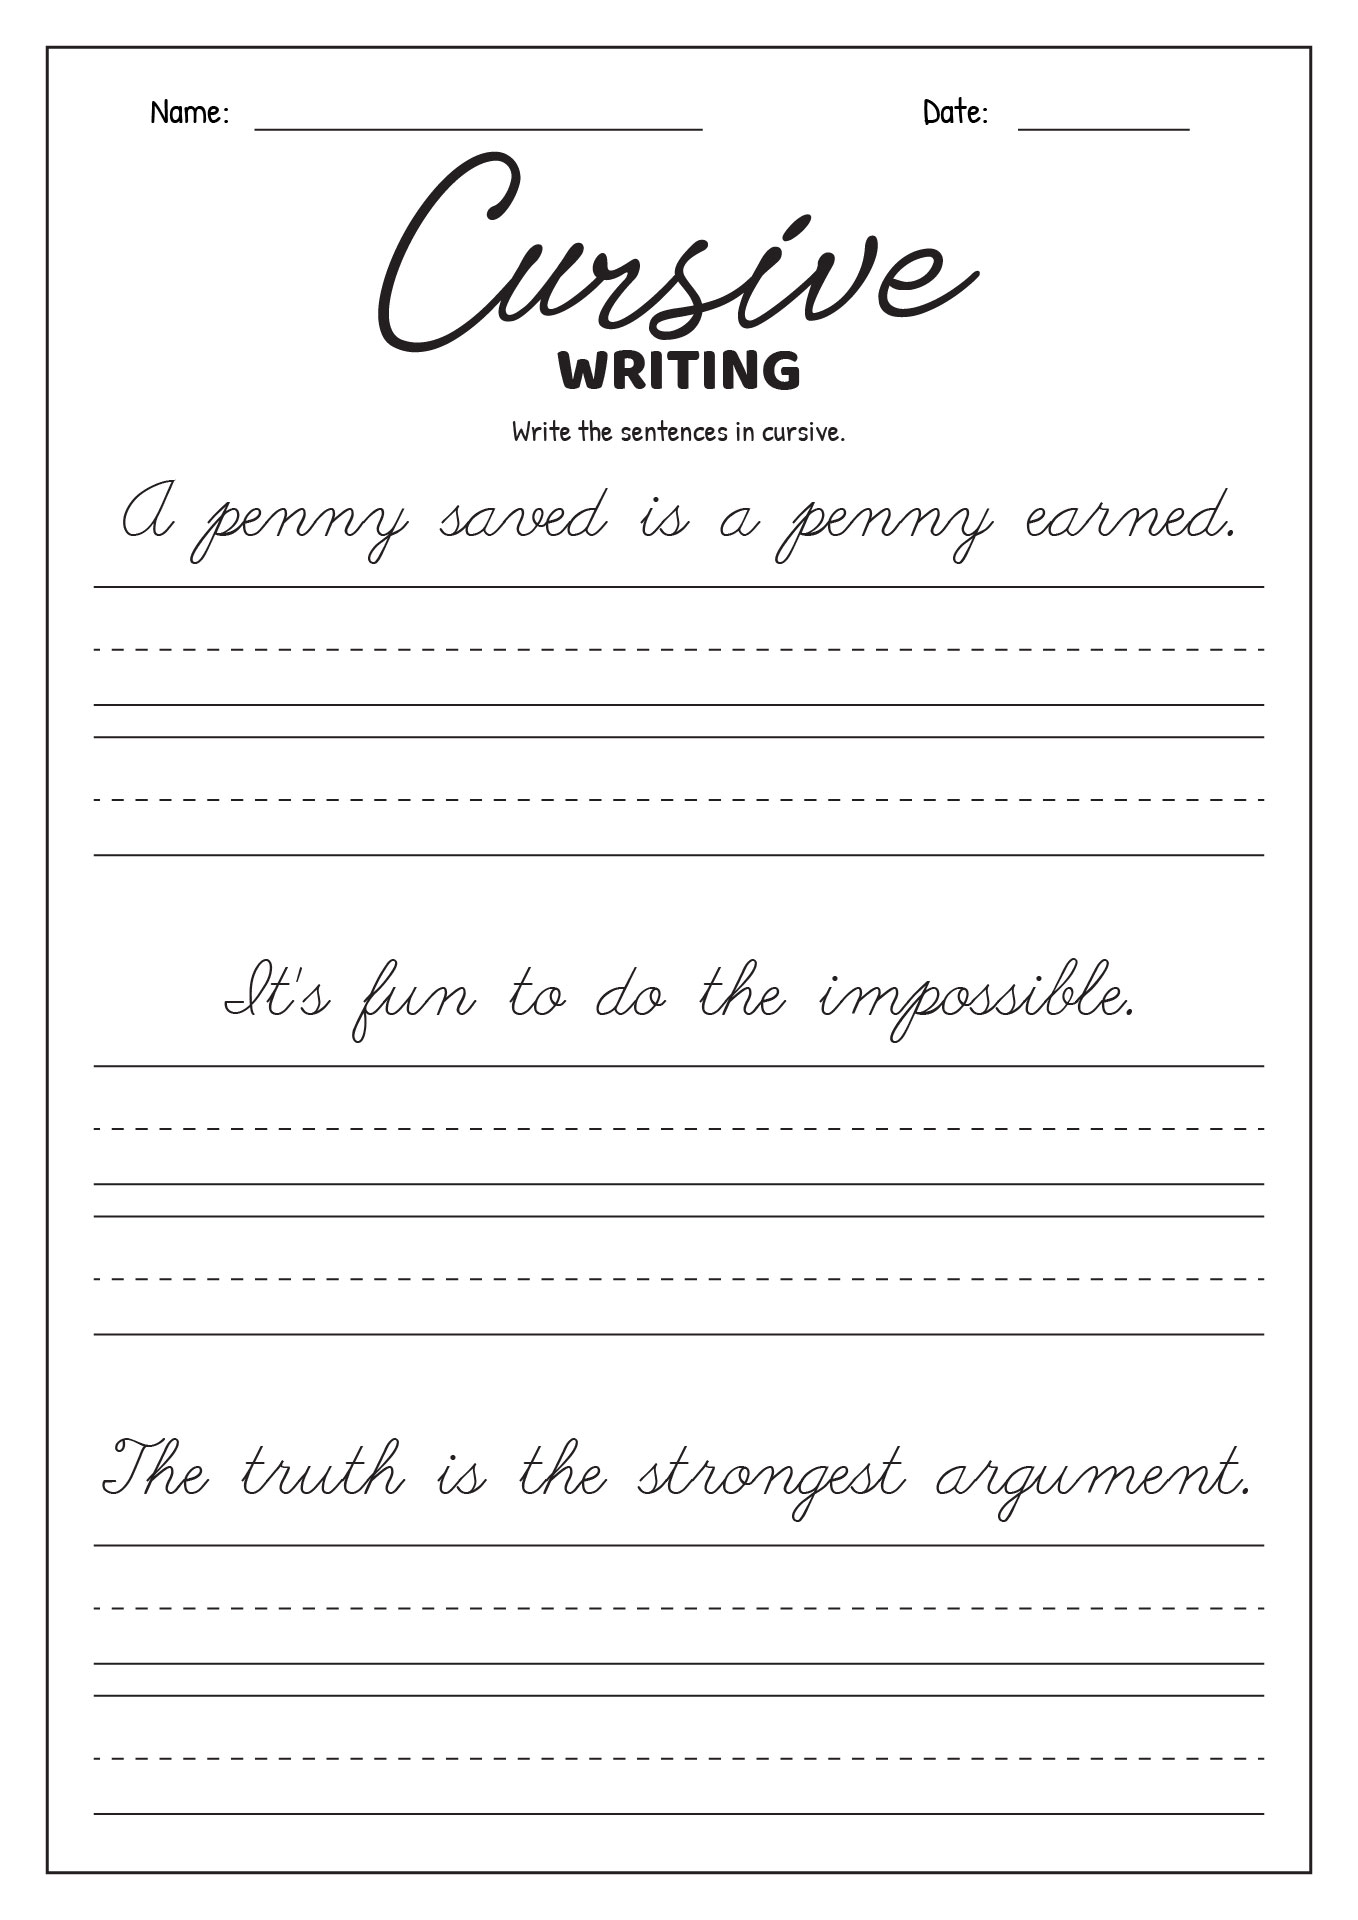 16 Best Images of Cursive Writing Worksheets For 3rd Grade - Free